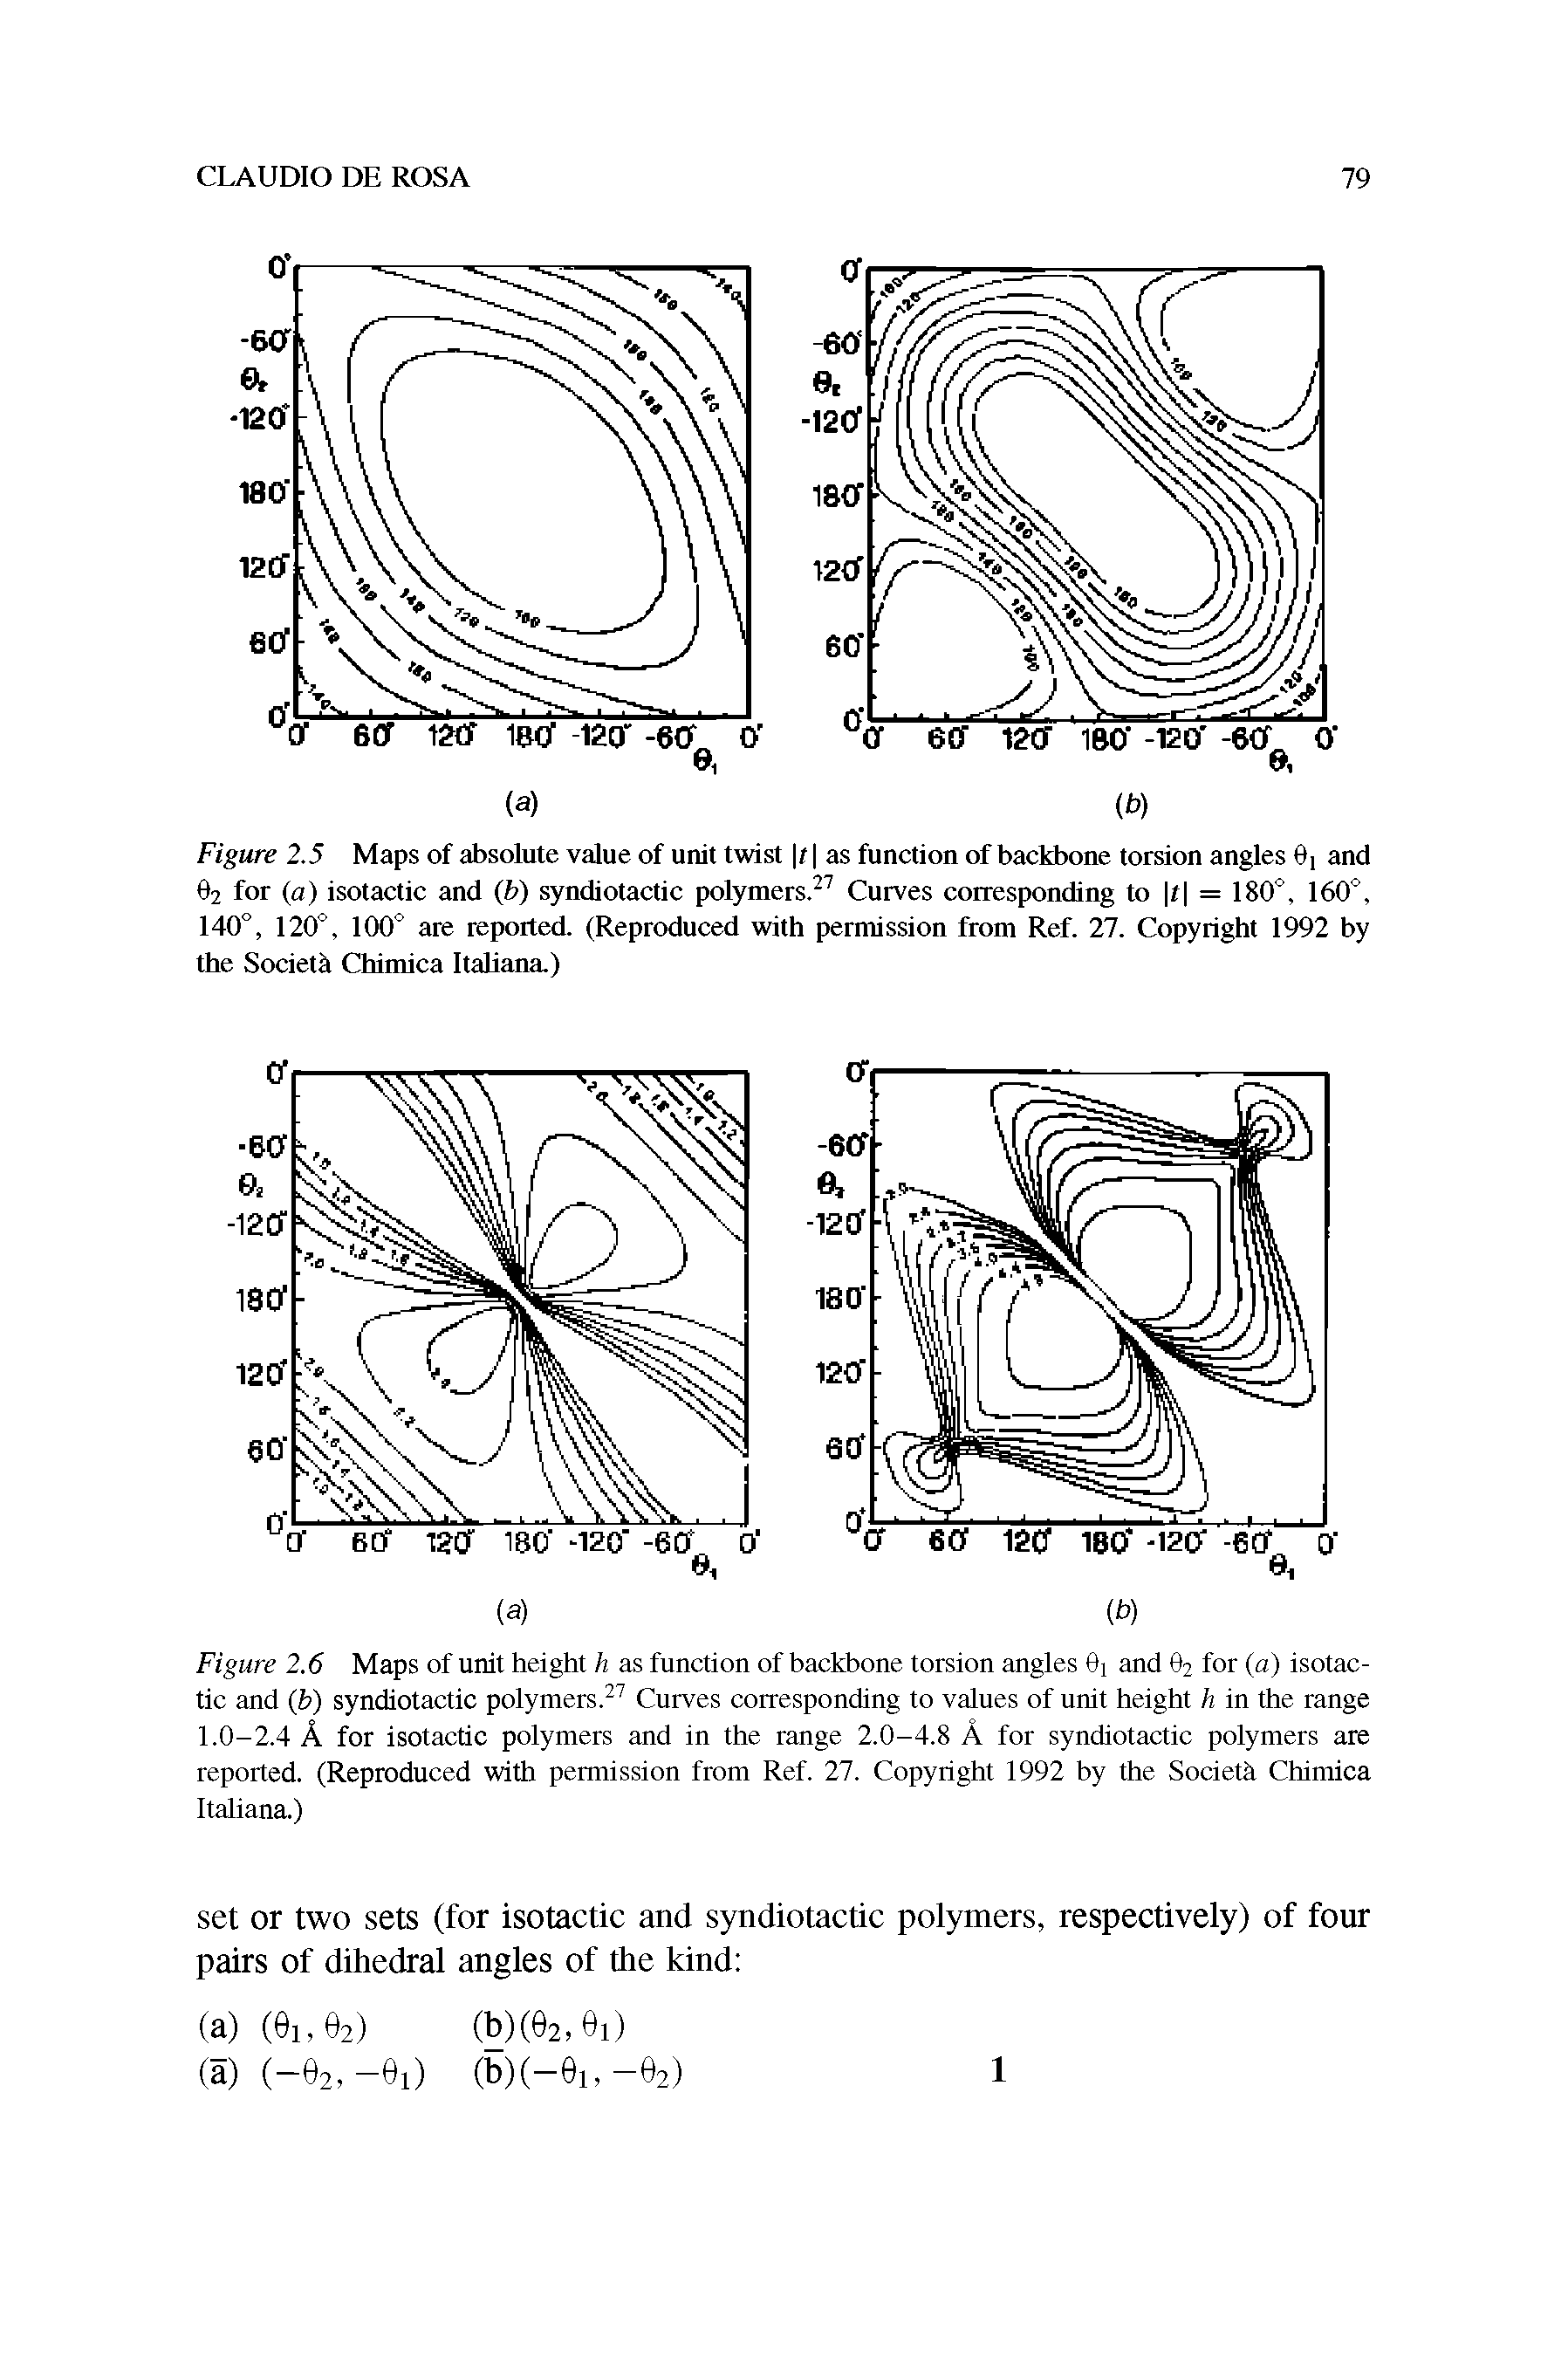 Figure 2.5 Maps of absolute value of unit twist t as function of backbone torsion angles 0, and 62 for (a) isotactic and (b) syndiotactic polymers.27 Curves corresponding to t = 180°, 160°, 140°, 120°, 100° are reported. (Reproduced with permission from Ref. 27. Copyright 1992 by the Society Chimica Italiana.)...